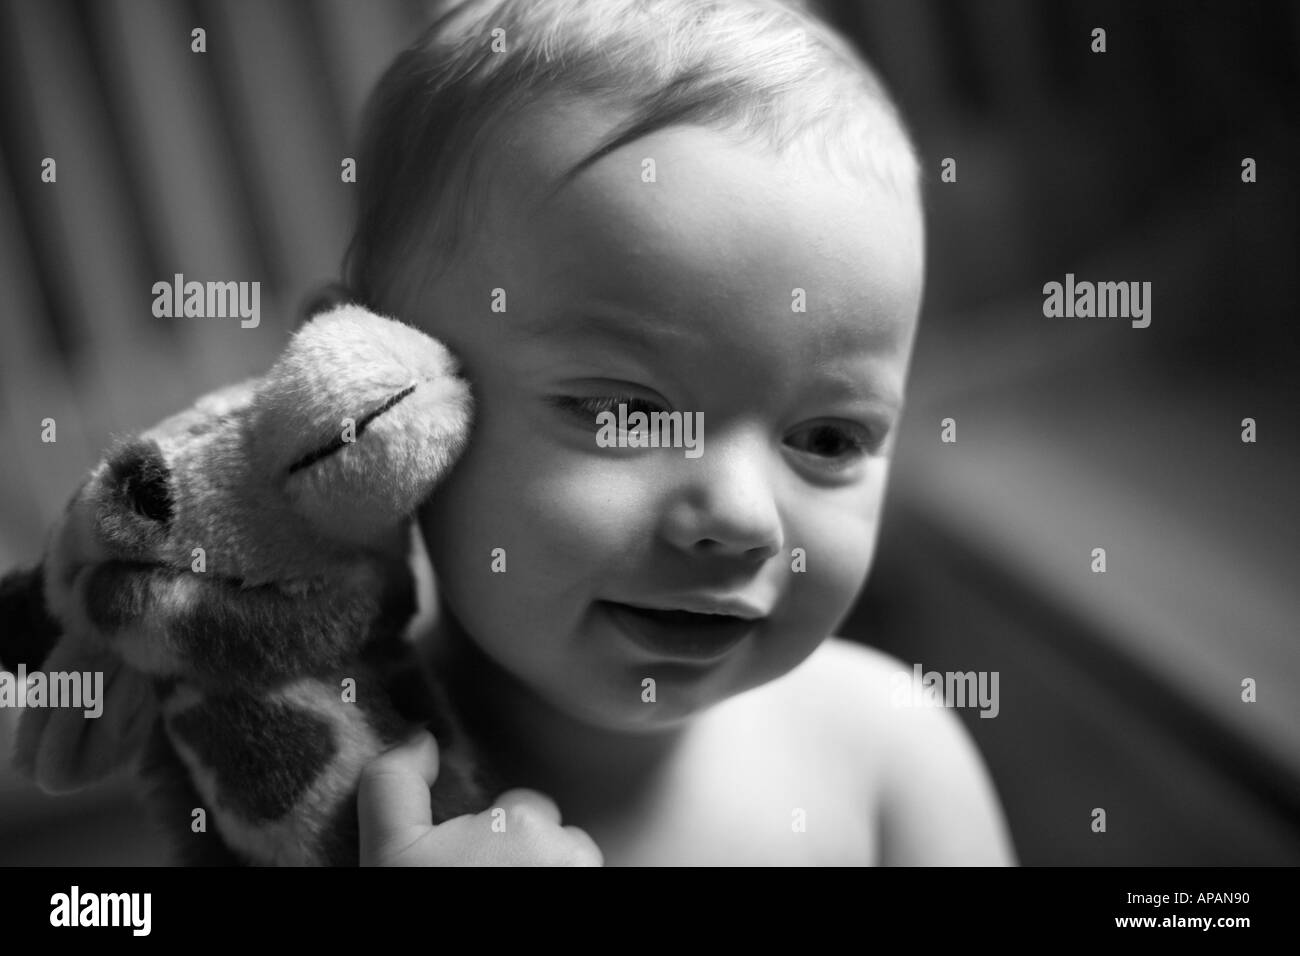 Toddler holding stuffed animal toy tight Stock Photo